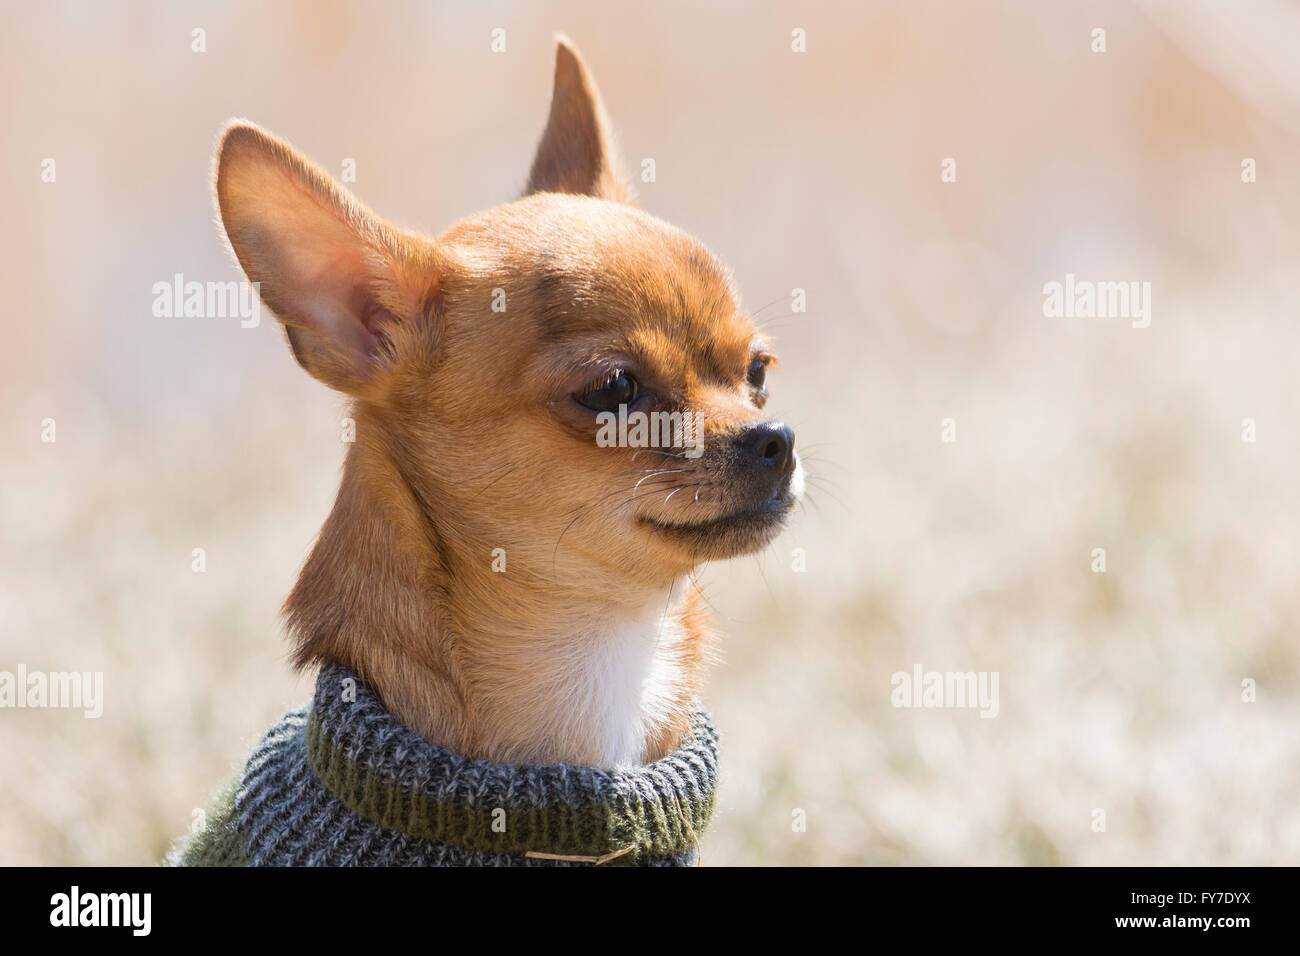 head shot of a young chihuahua dog Stock Photo